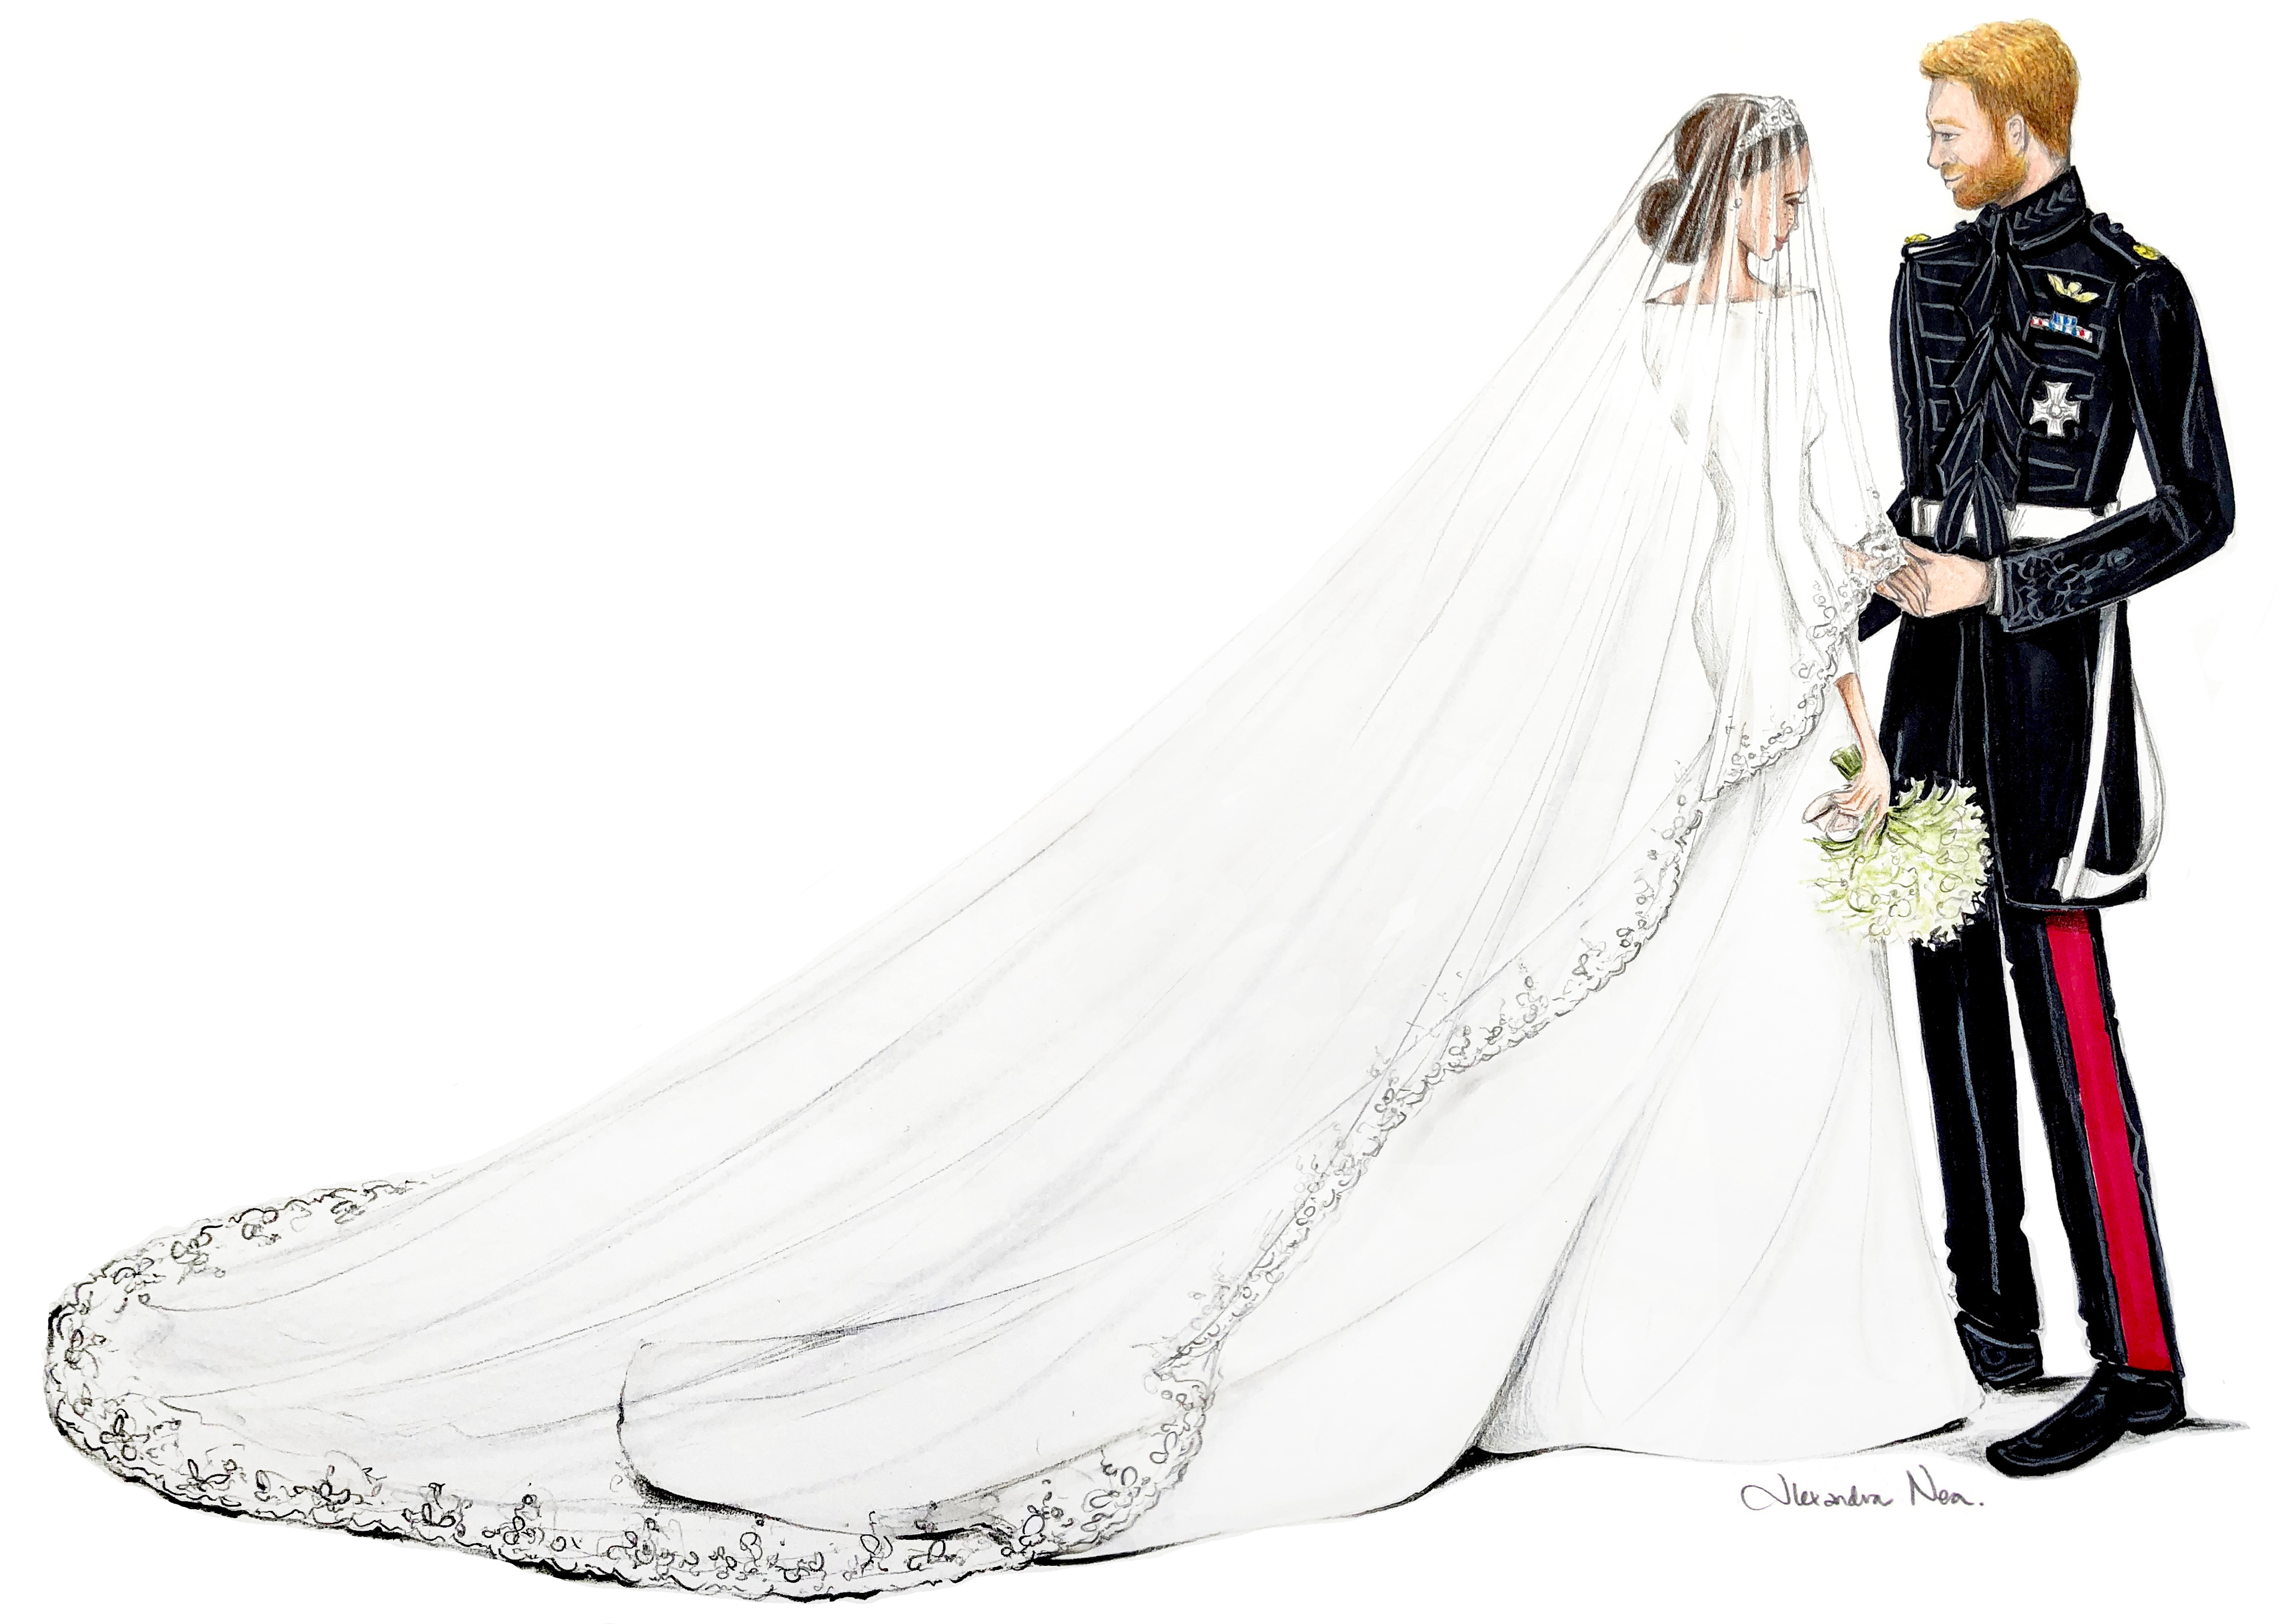 Illustration of the royal wedding by illustrator Alexandra Nea showing Prince Harry with his wife Meghan Markle, the Duke and Duchess of Sussex (Alexandra Nea)